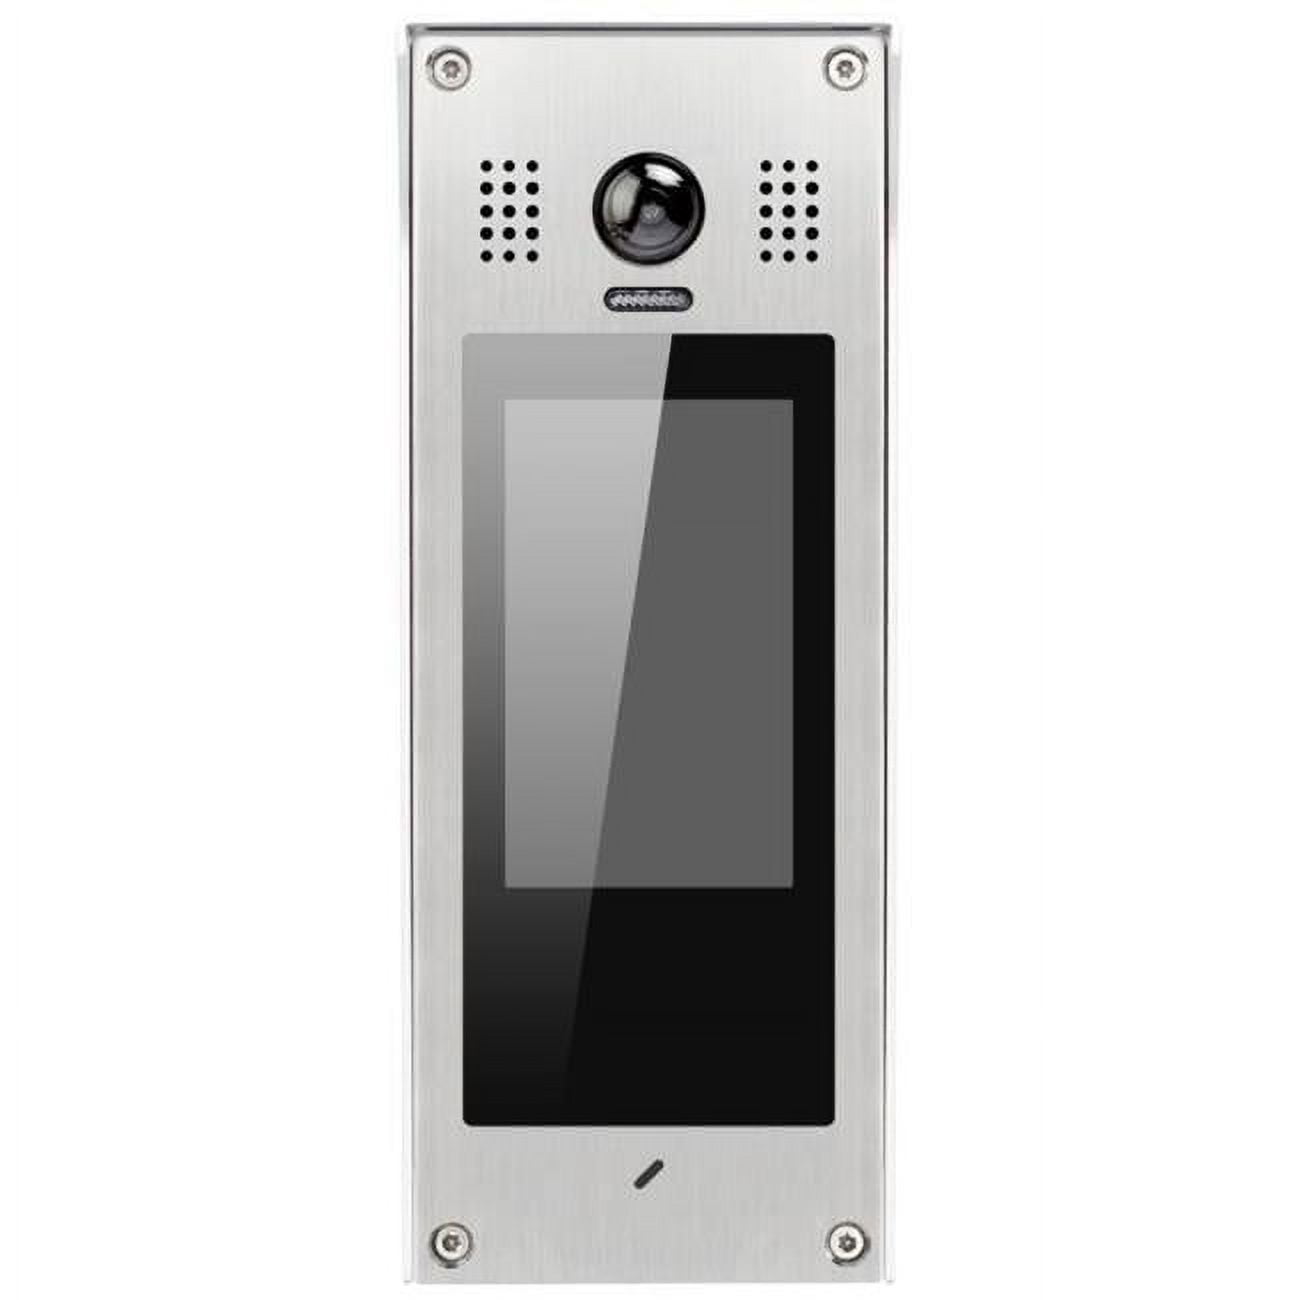 Picture of 2Easy Video Intercom System 6001-N IP Door Entry Camera Panel Video Intercom Door Station with Surface Mount